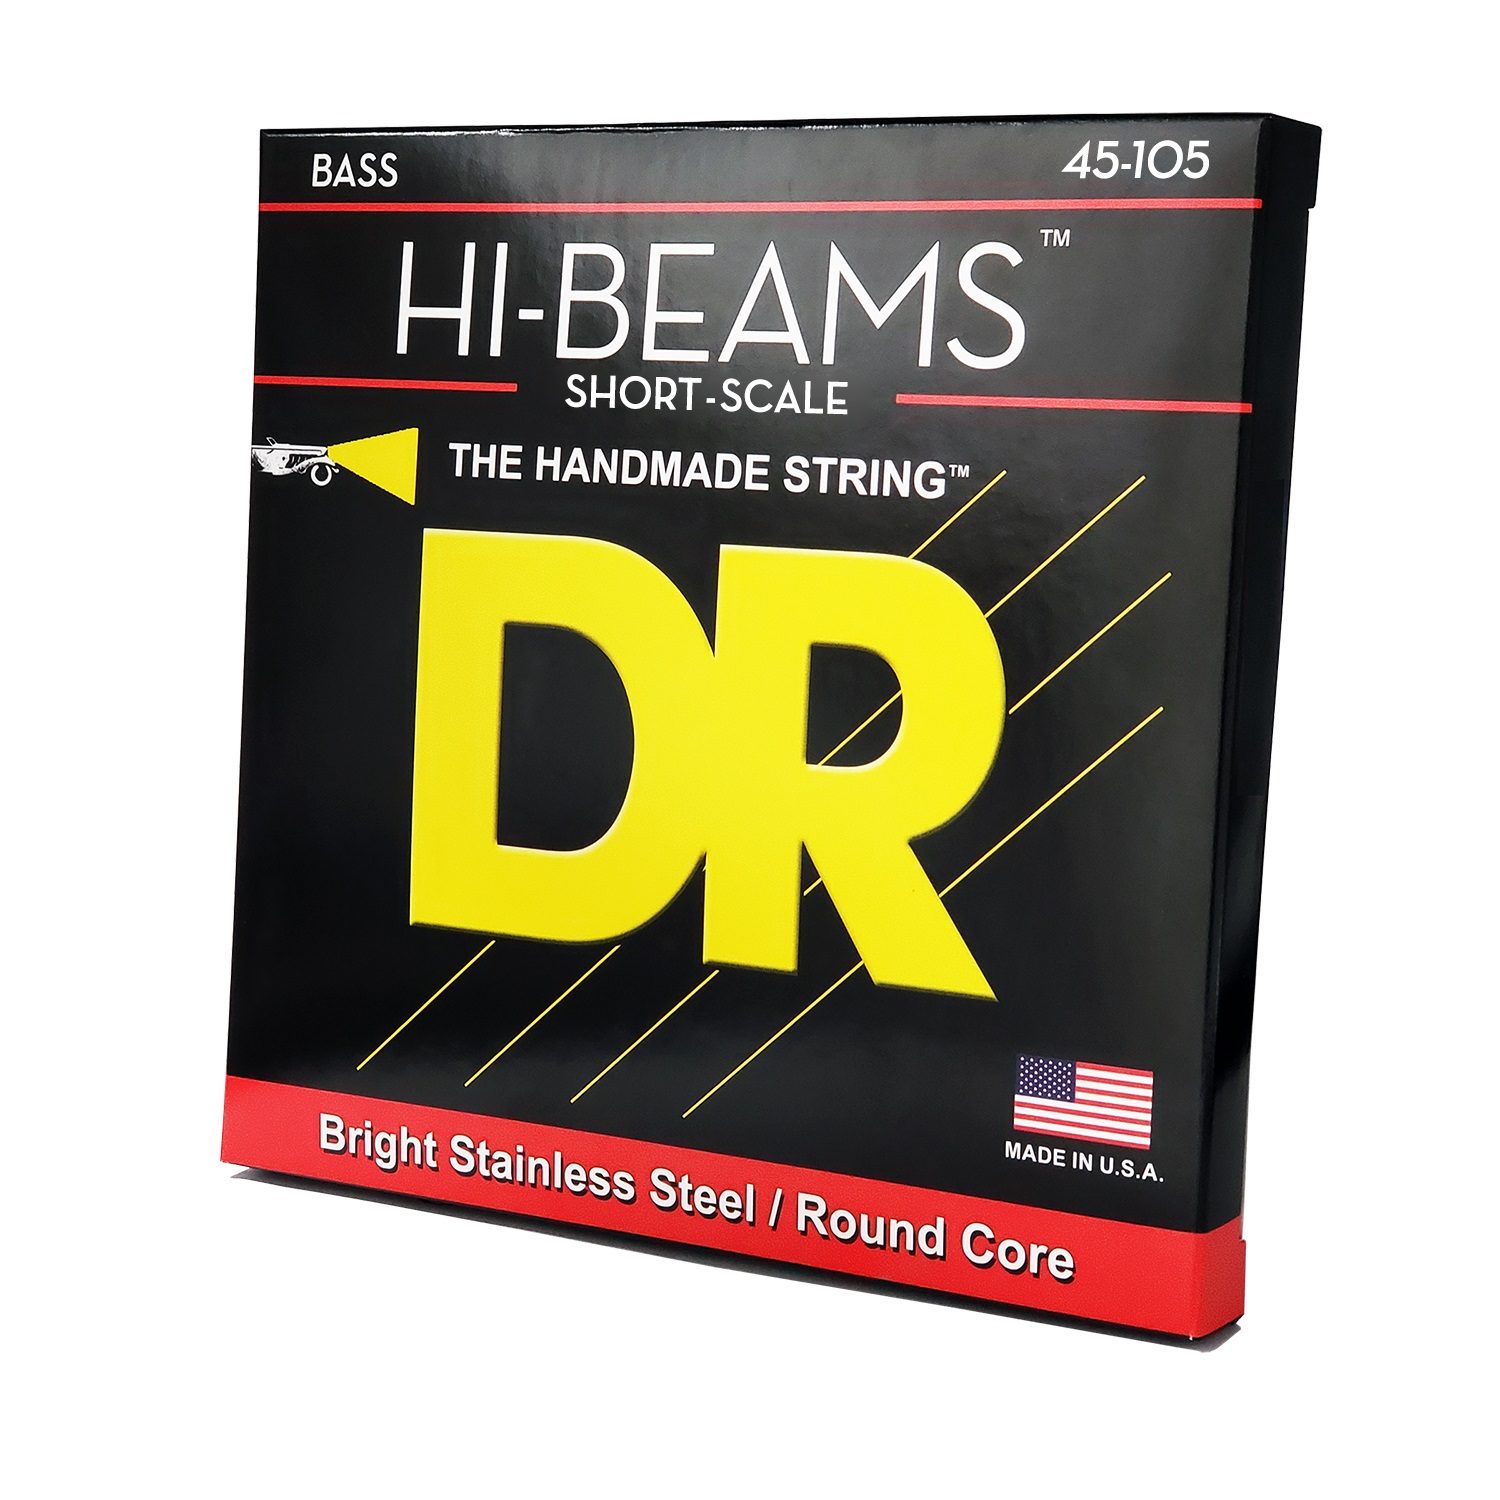 Dr Hi-beams Stainless Steel 45-105 Short Scale - Electric bass strings - Variation 1